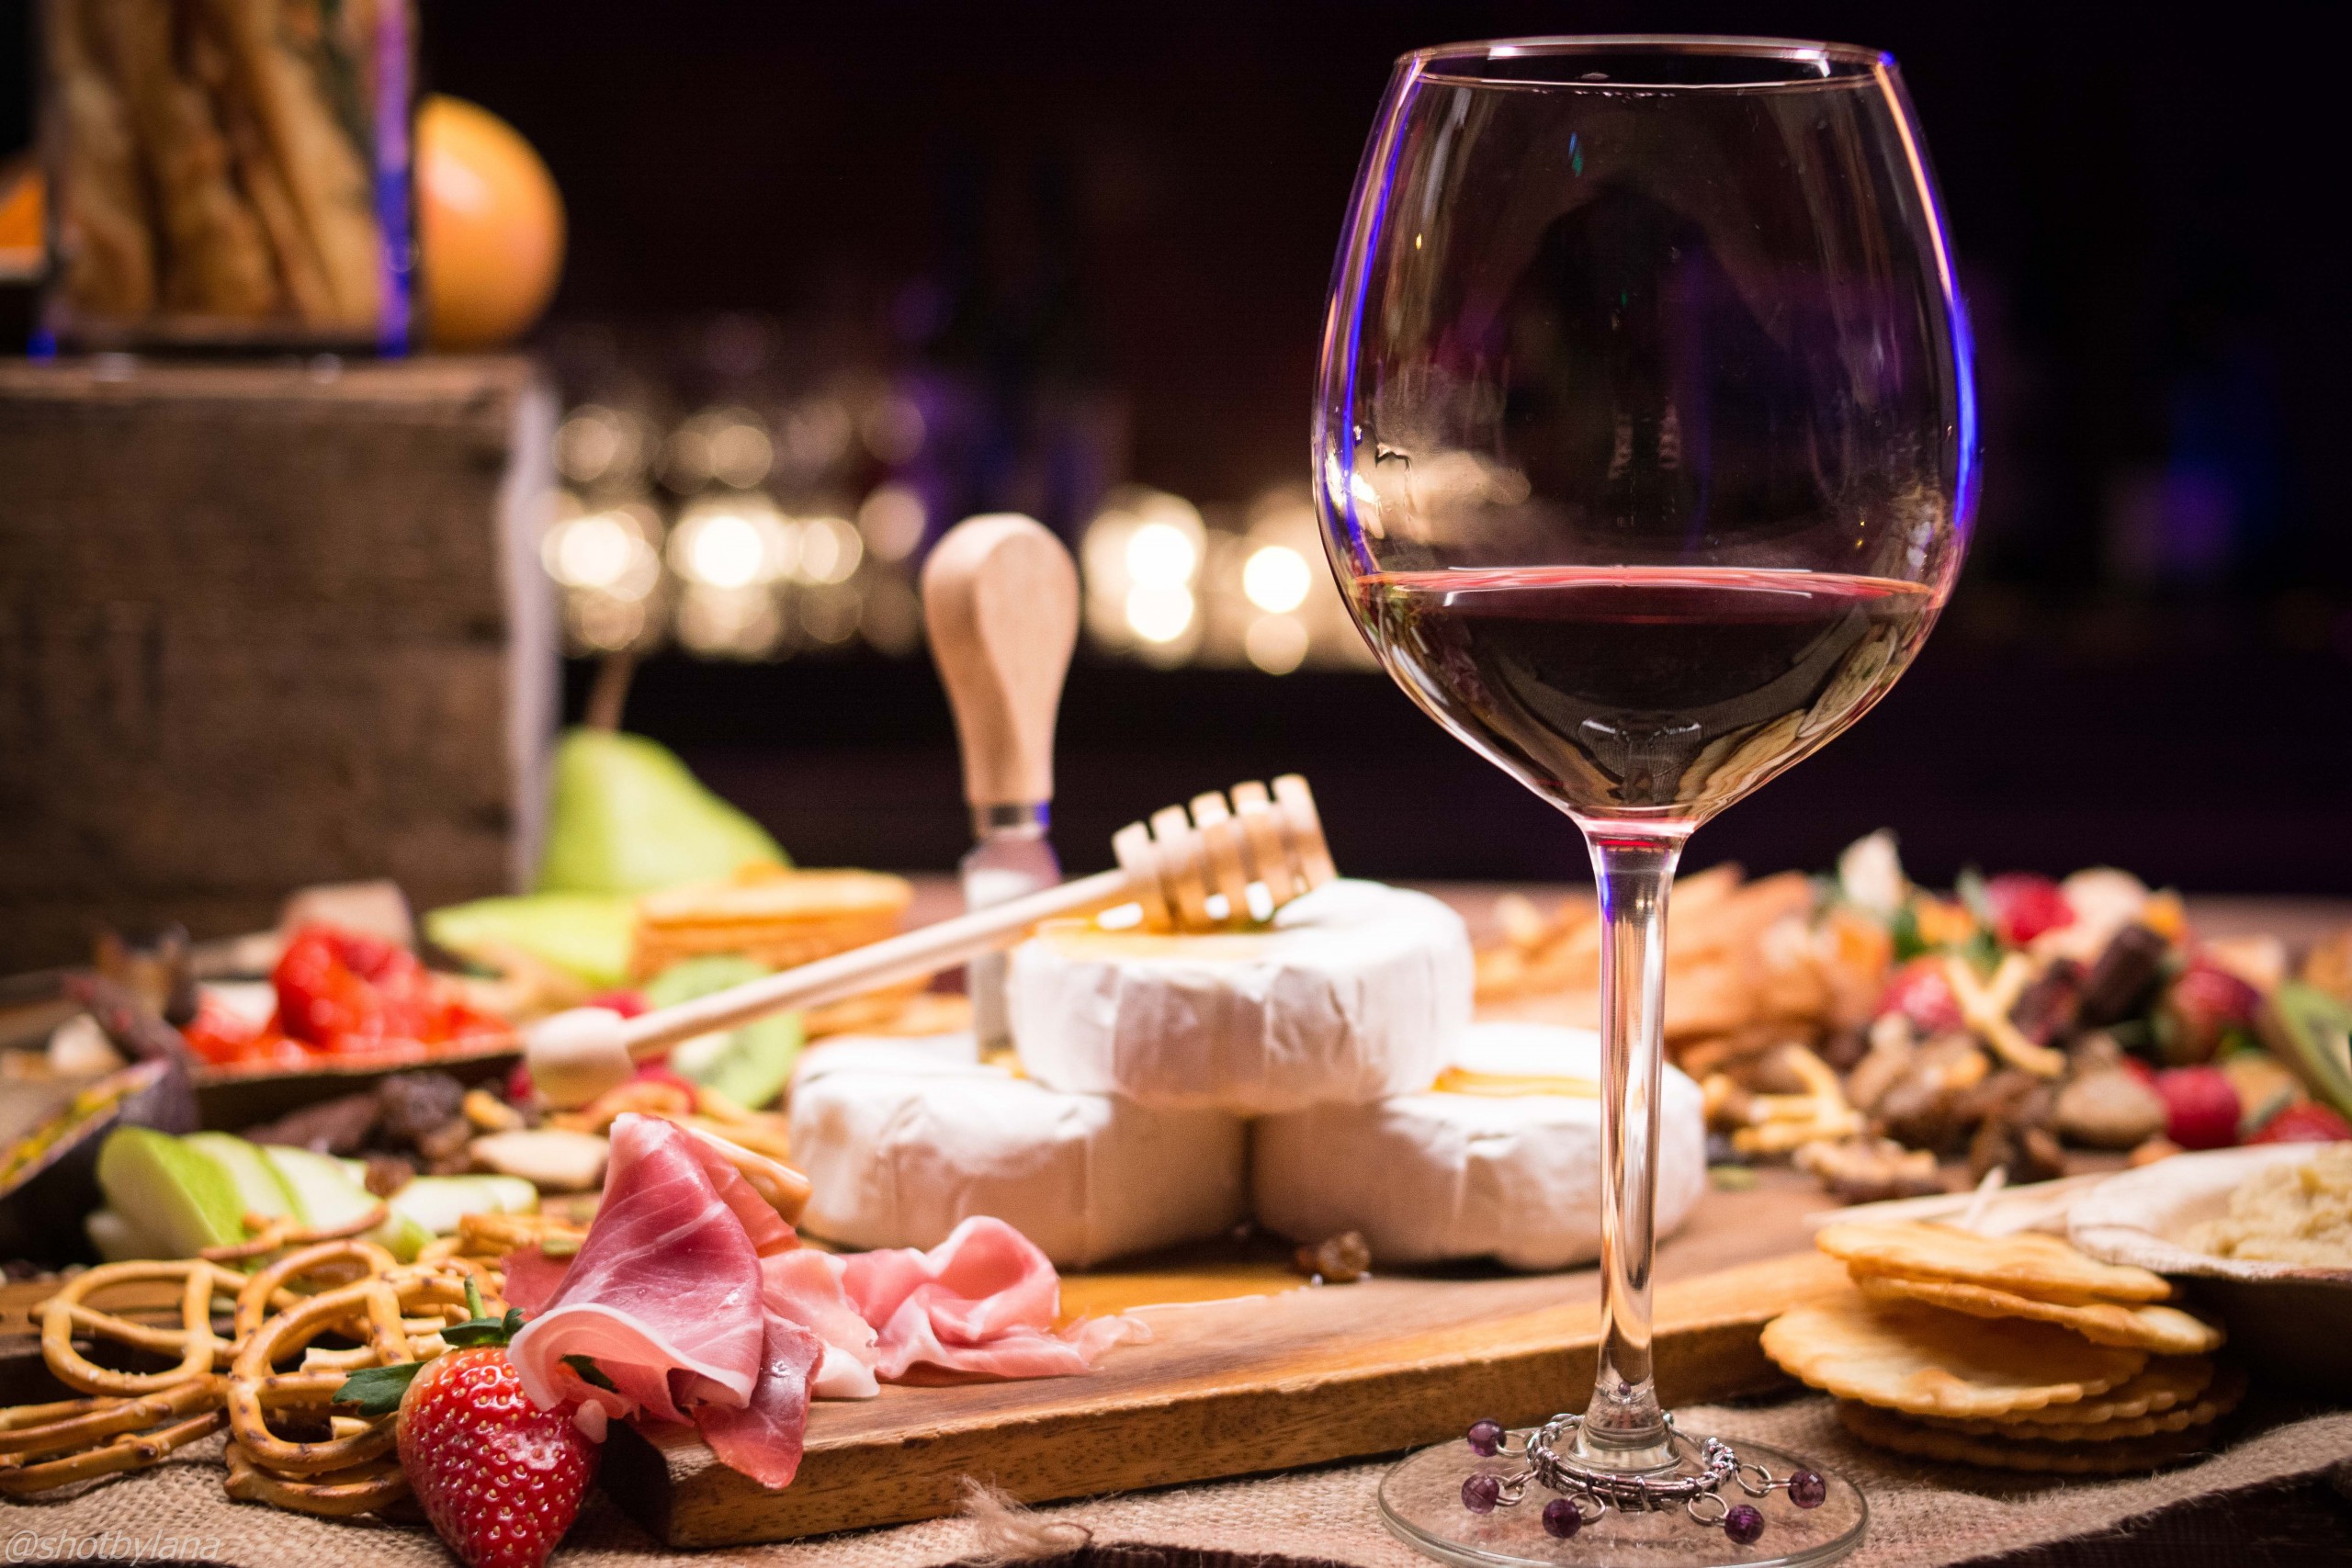 You don’t need to be a wine expert to learn which types of wine work best with which styles of food. You may learn a lot from restaurants that serve wine, such as looking at Del Frisco's grill menu, because they have an extensive wine selection that can be coupled with their dishes.